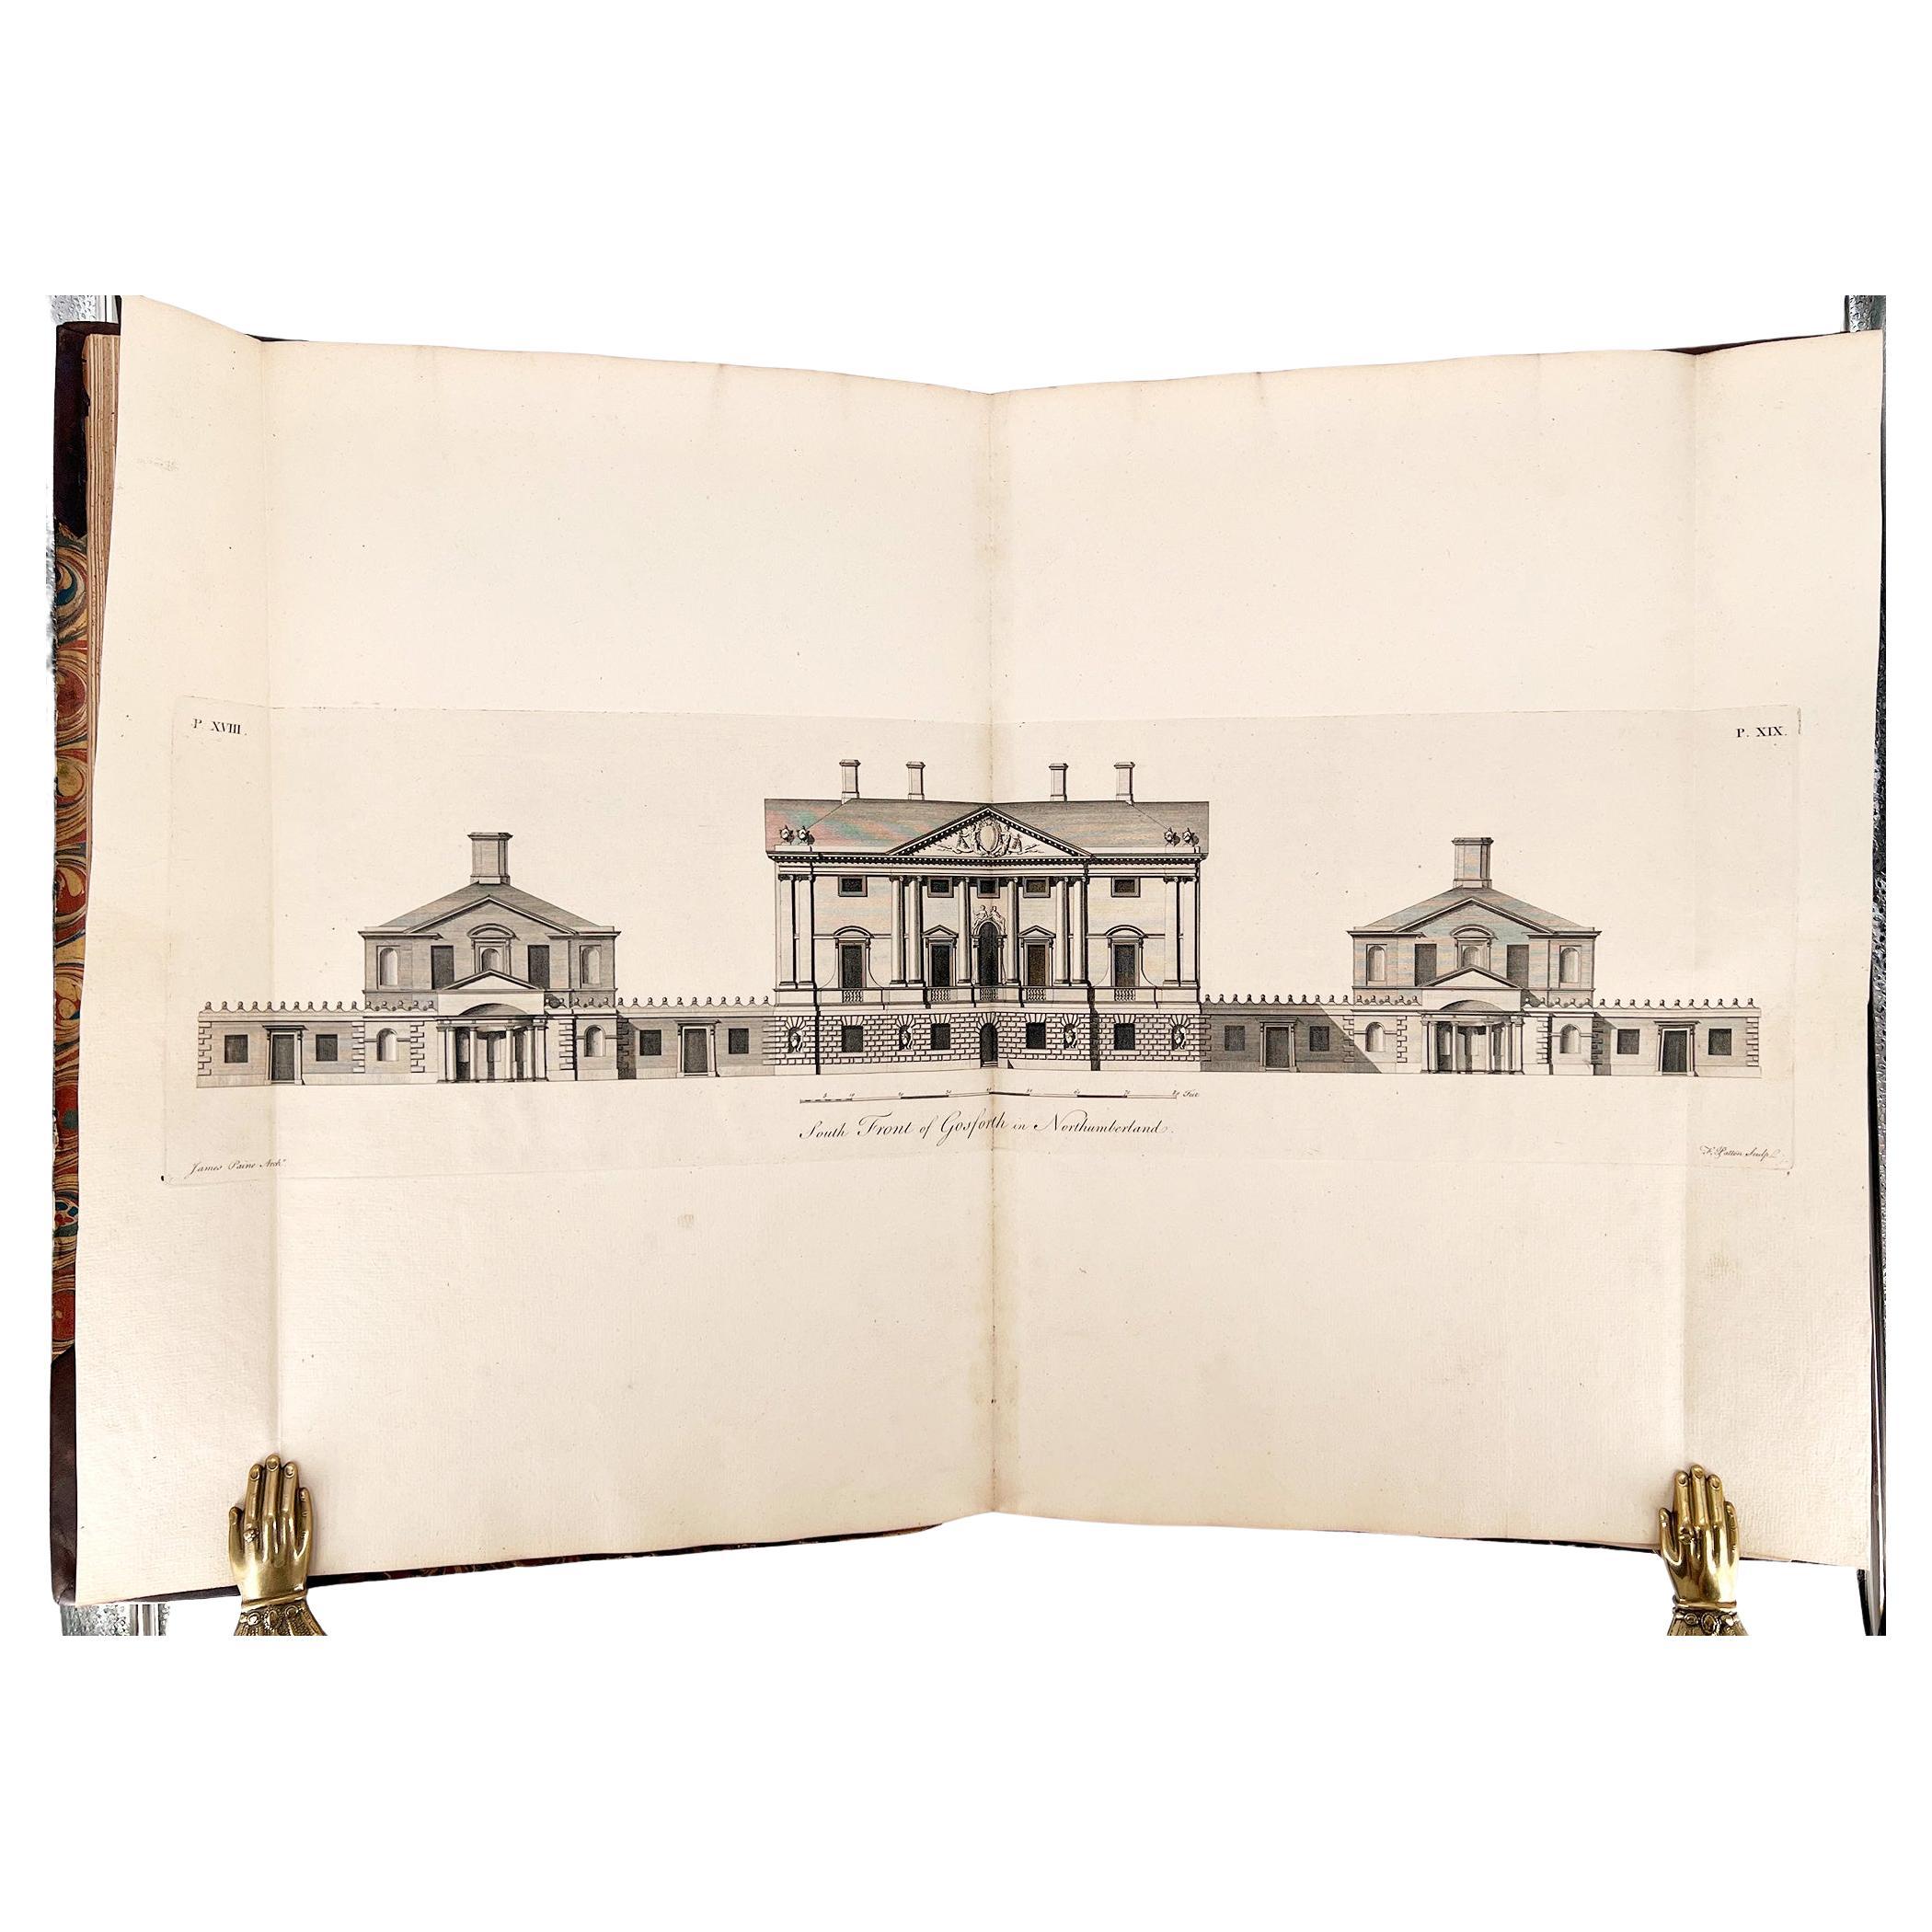 James Paine – Plans, Elevations and Section of Noblemen and Gentlemen's Houses